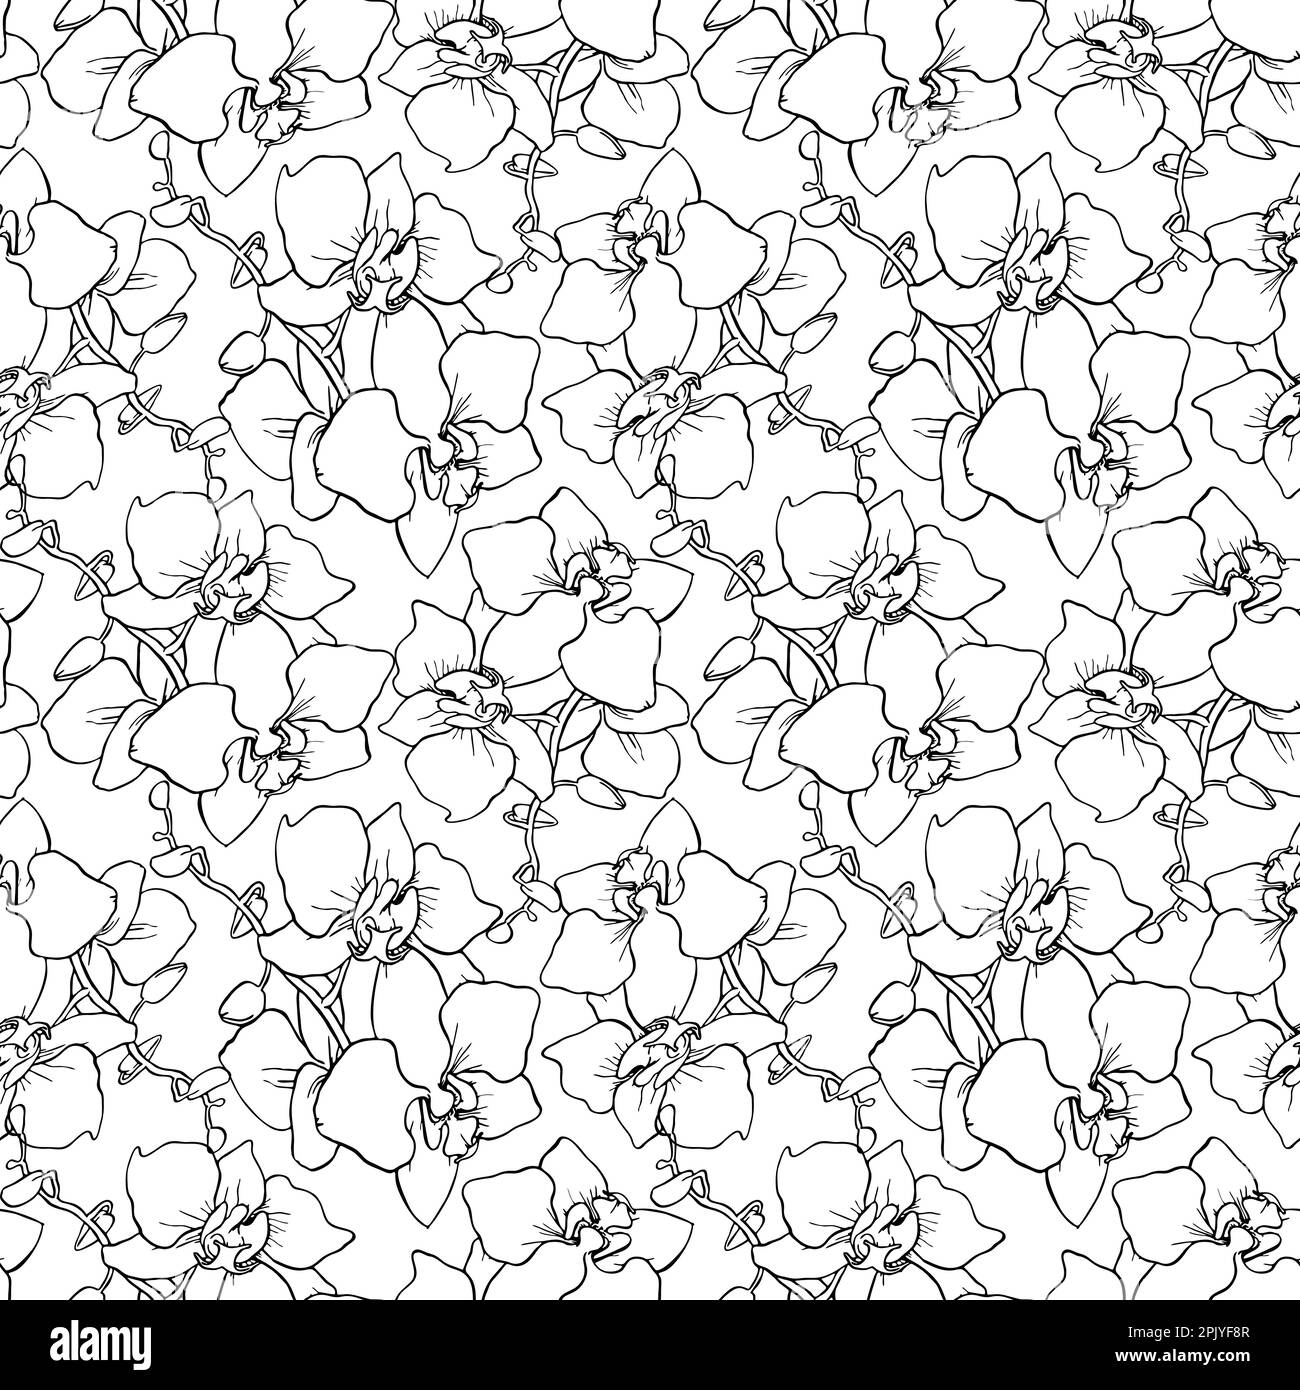 seamless pattern of large black silhouettes of orchids on a white background, texture, design Stock Photo